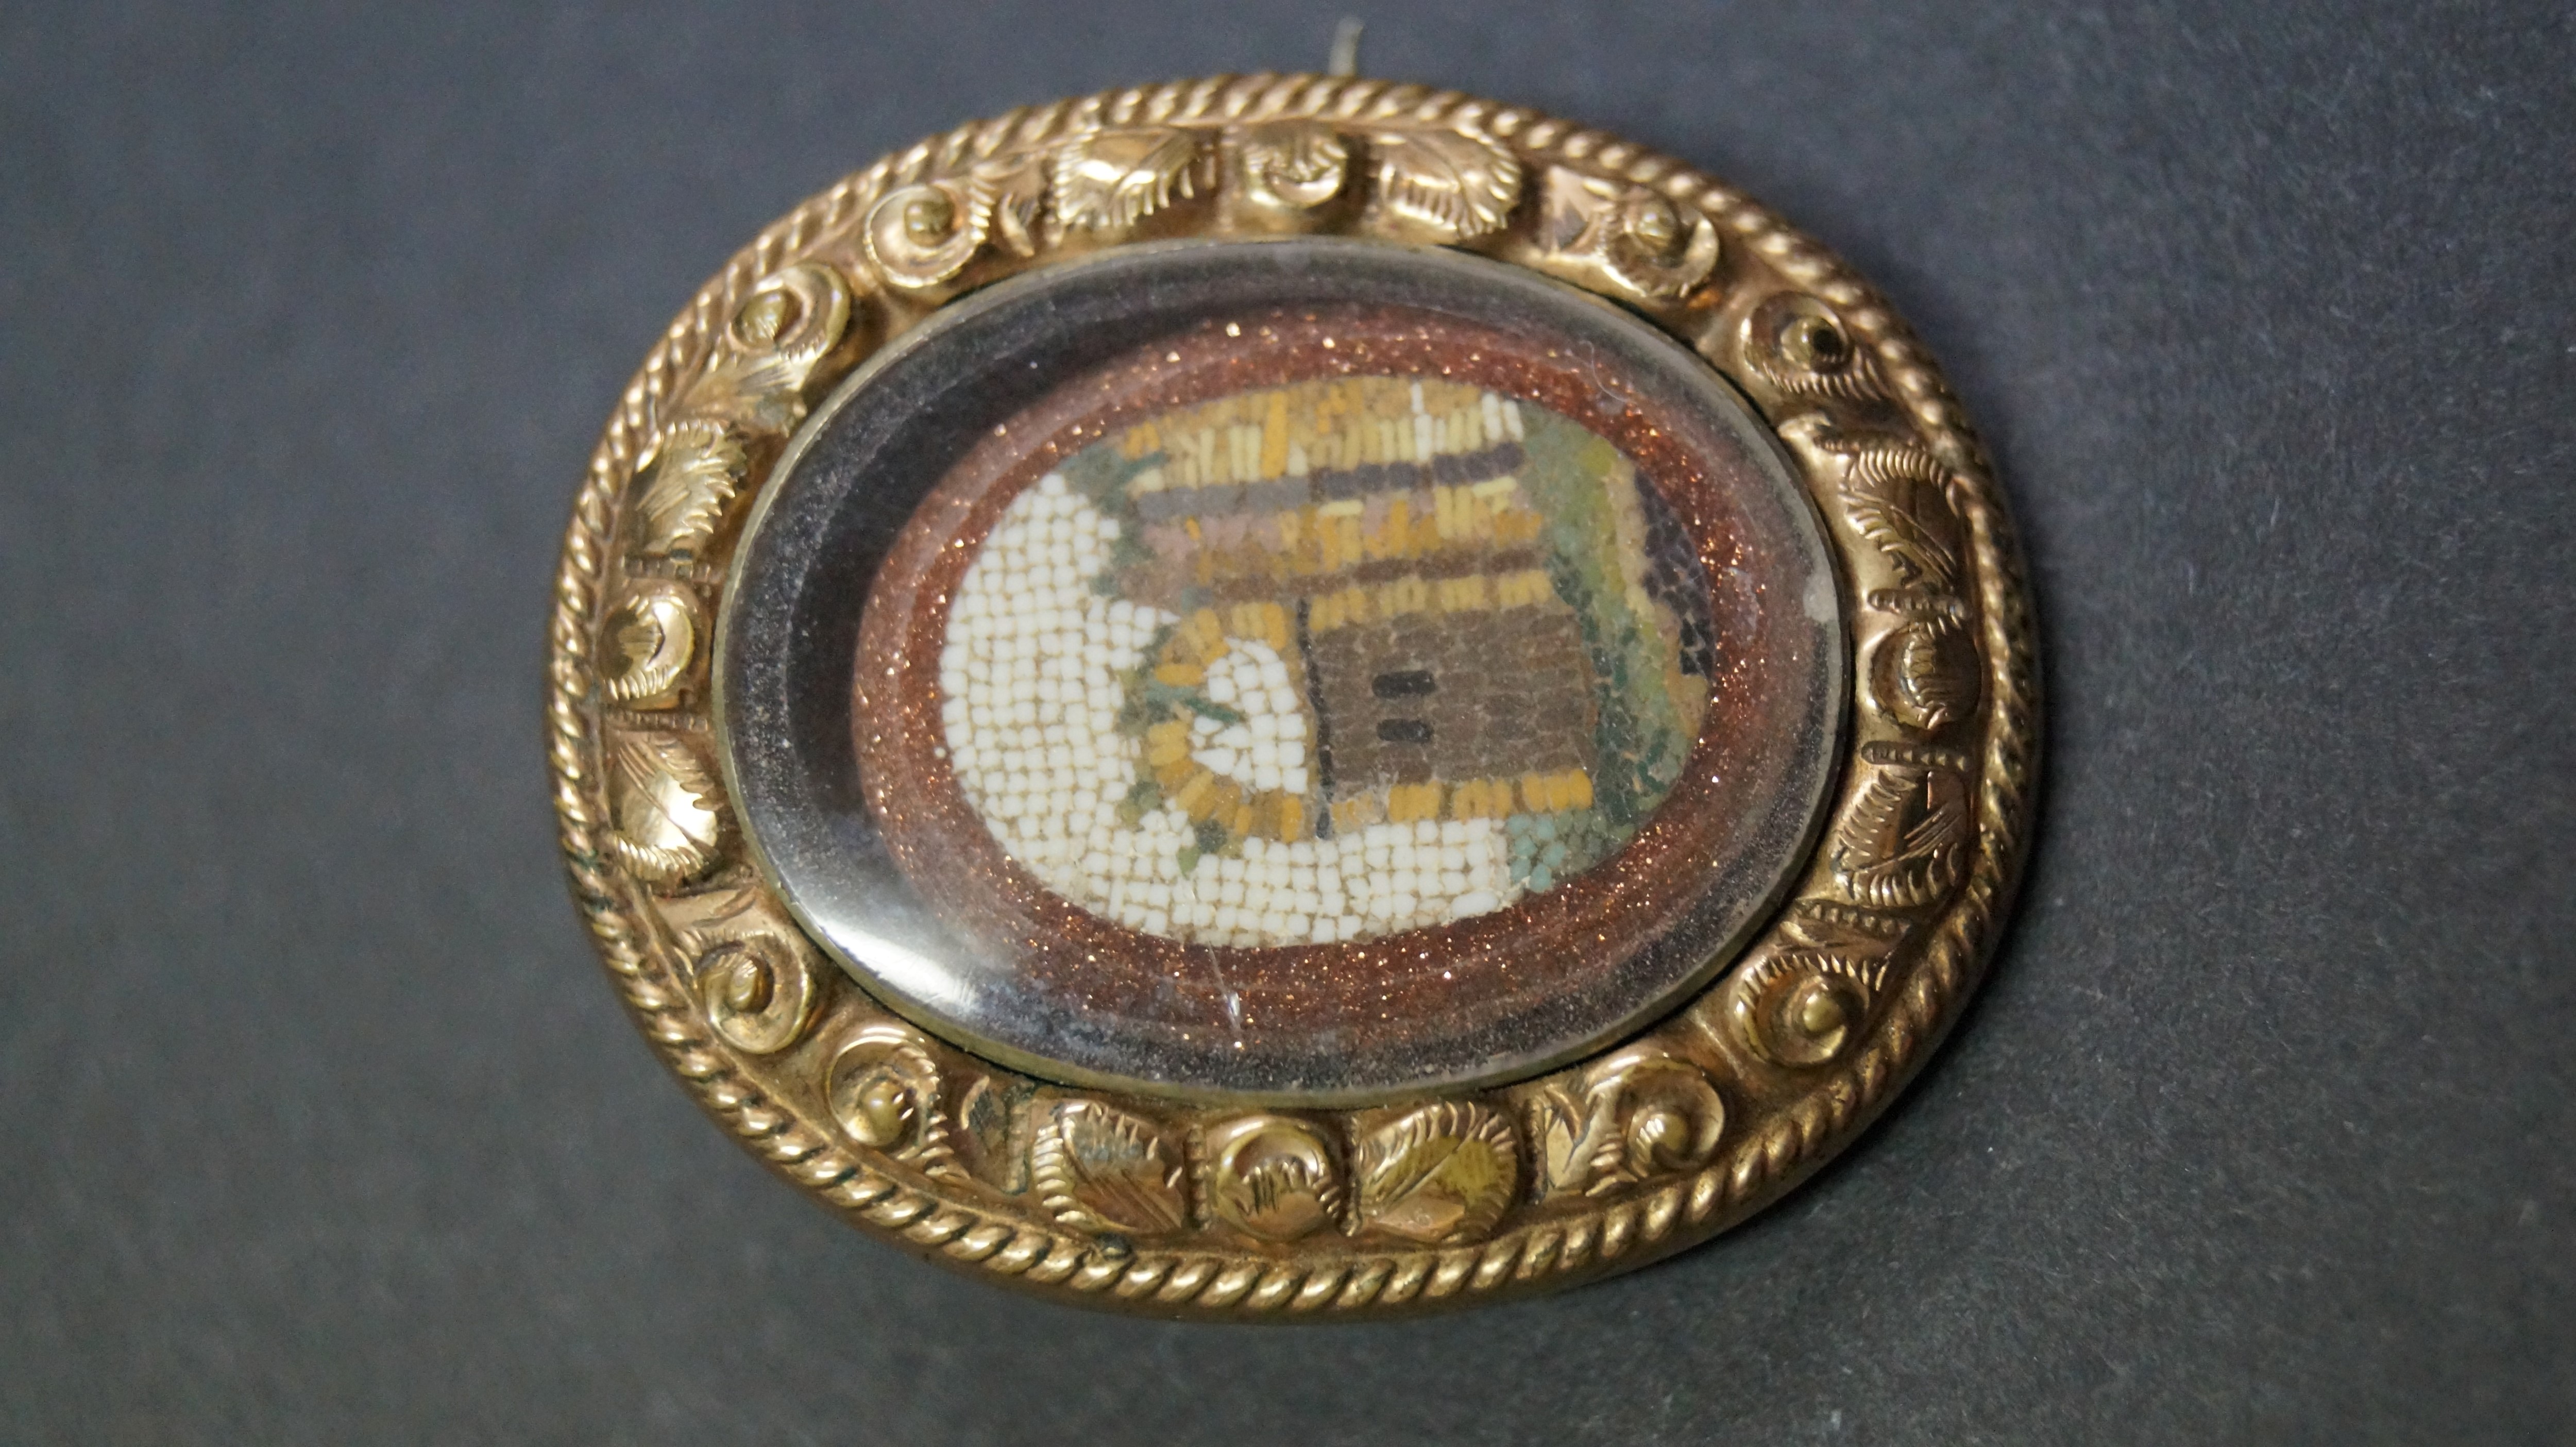 An antique micro mosaic brooch depicting ruin, in gold coloured frame, 3.5 x 3cm.